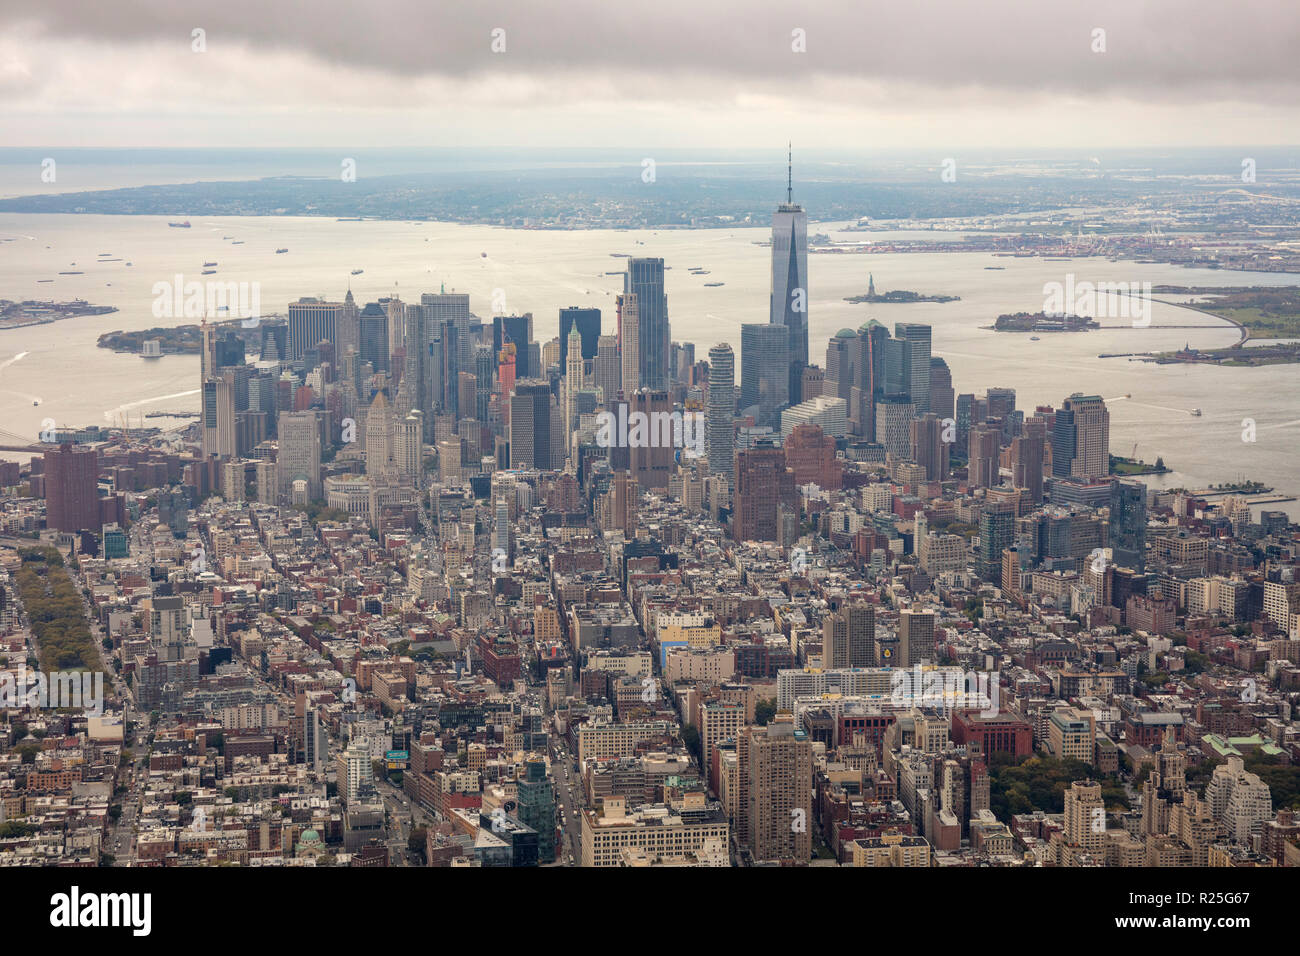 aerial view of Lower Manhattan and financial district skyscrapers, New York City, USA Stock Photo